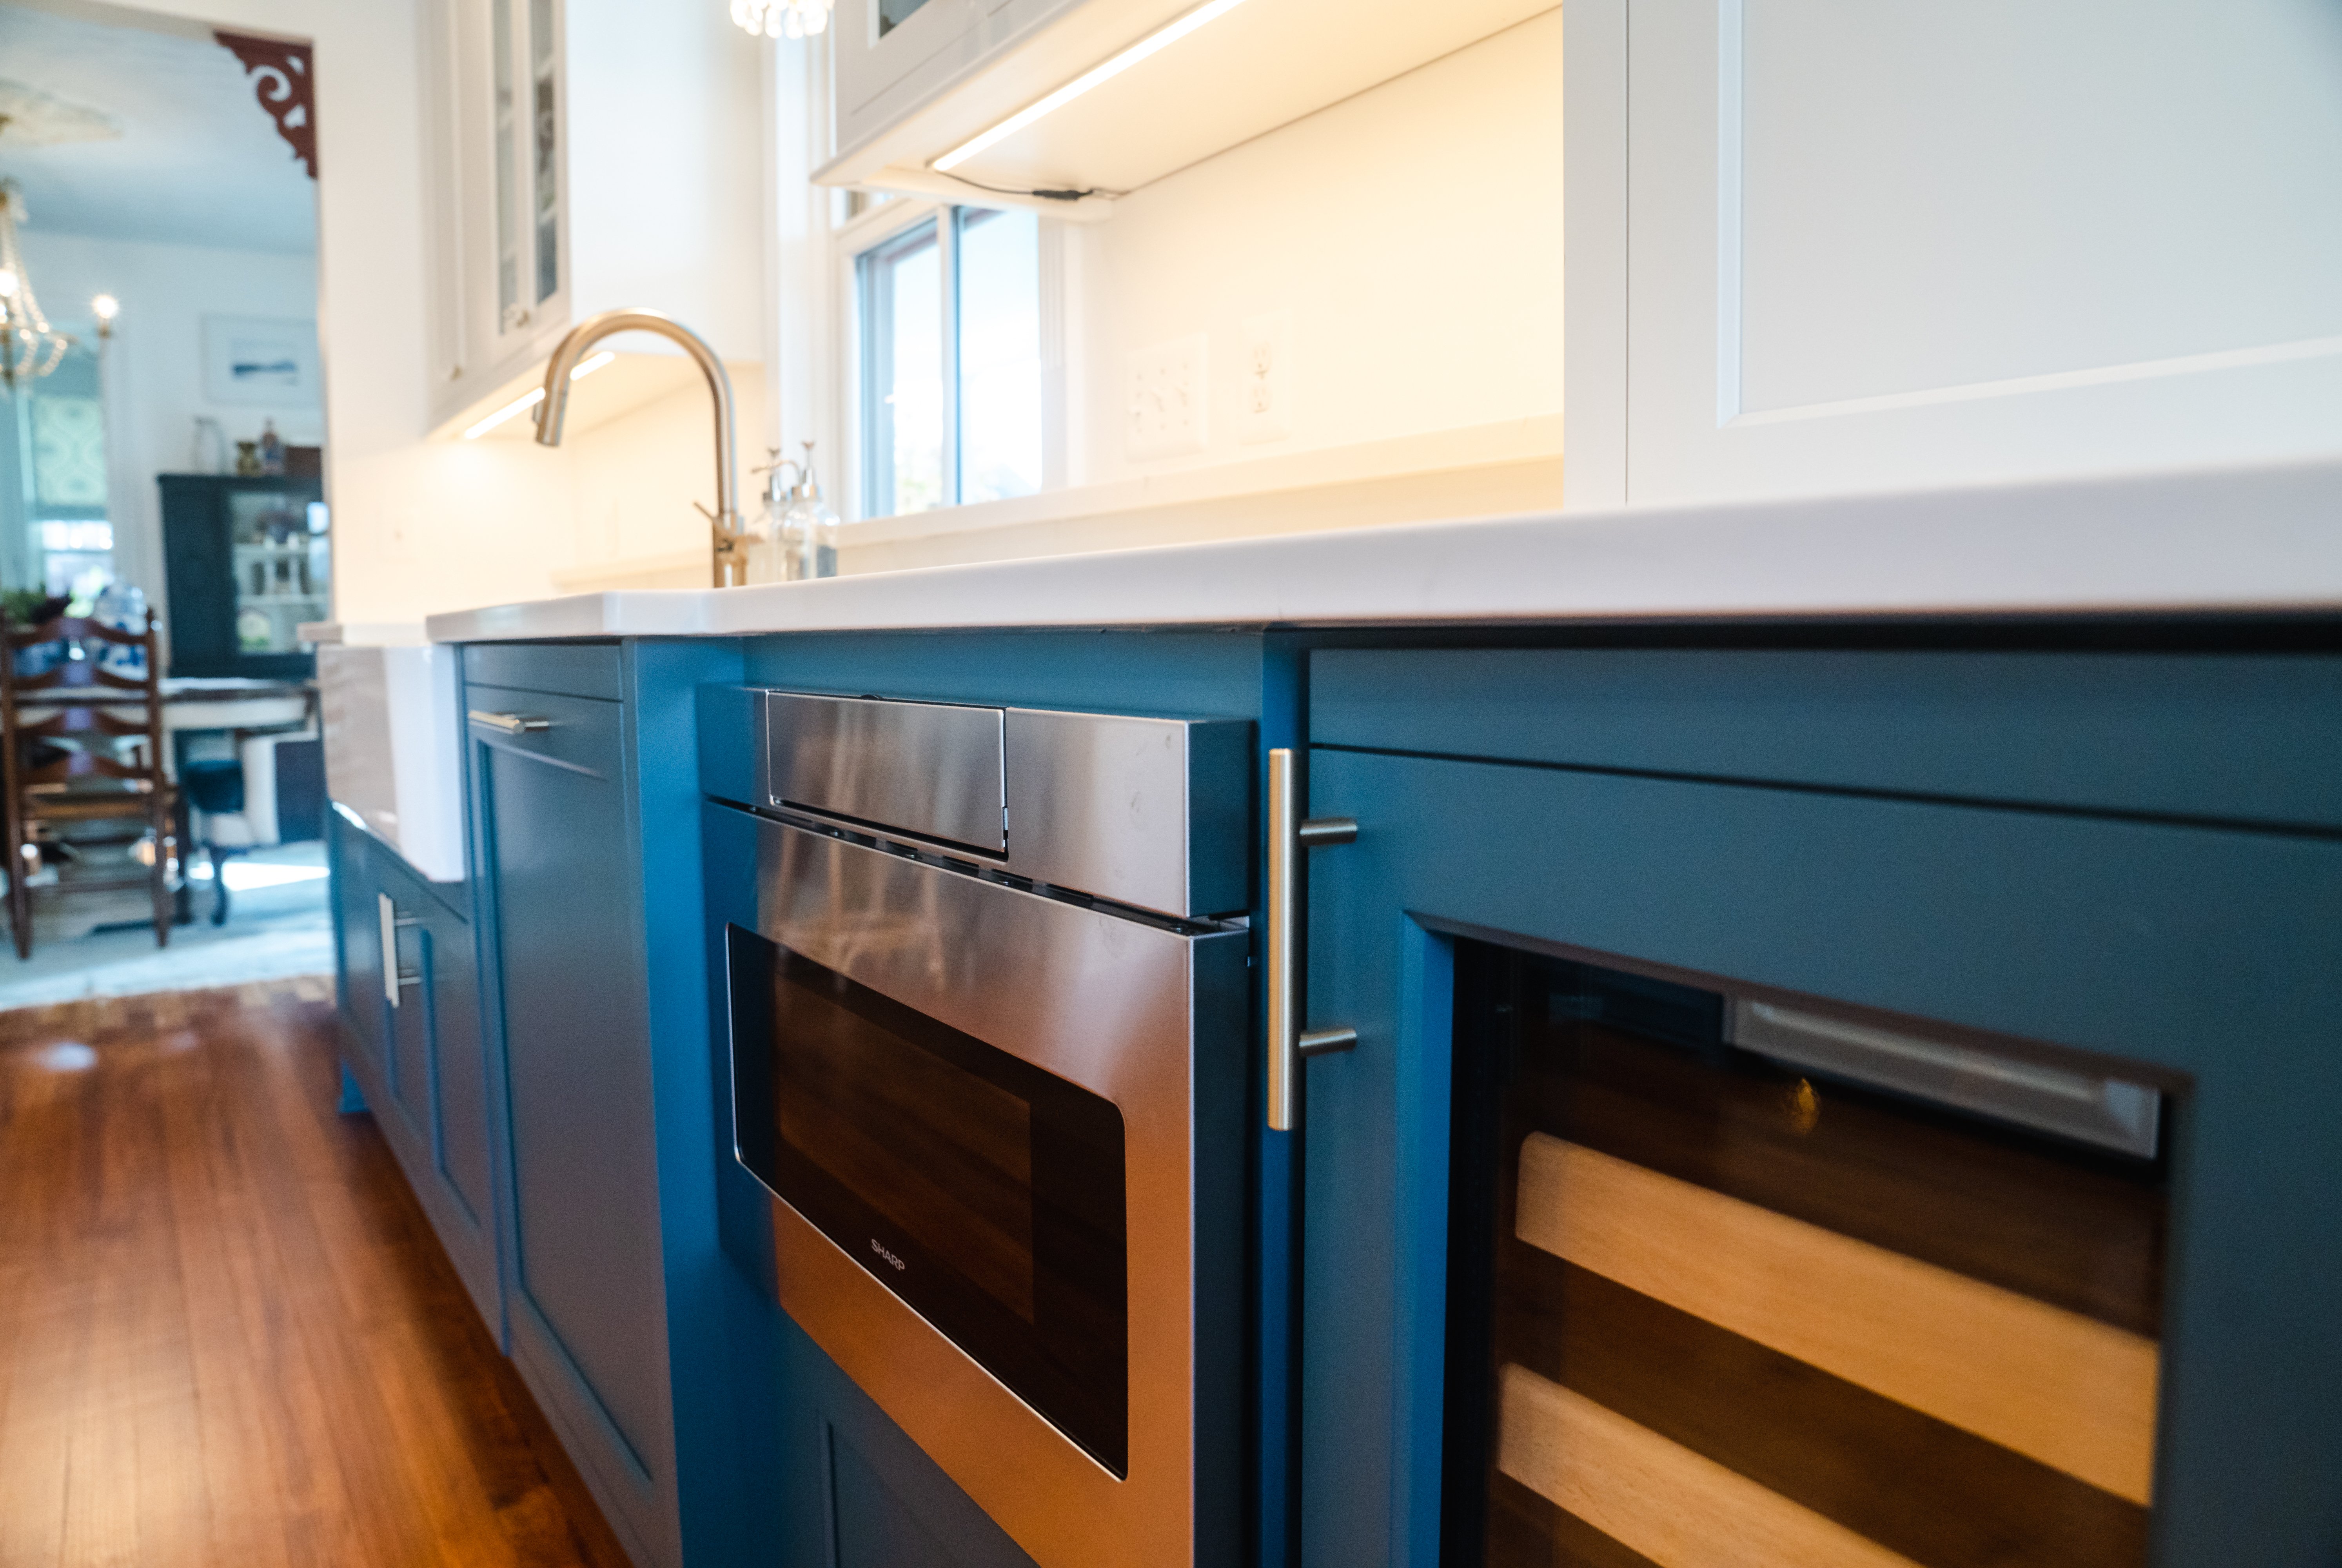 Dark blue with gold handles on cabinets in kitchen